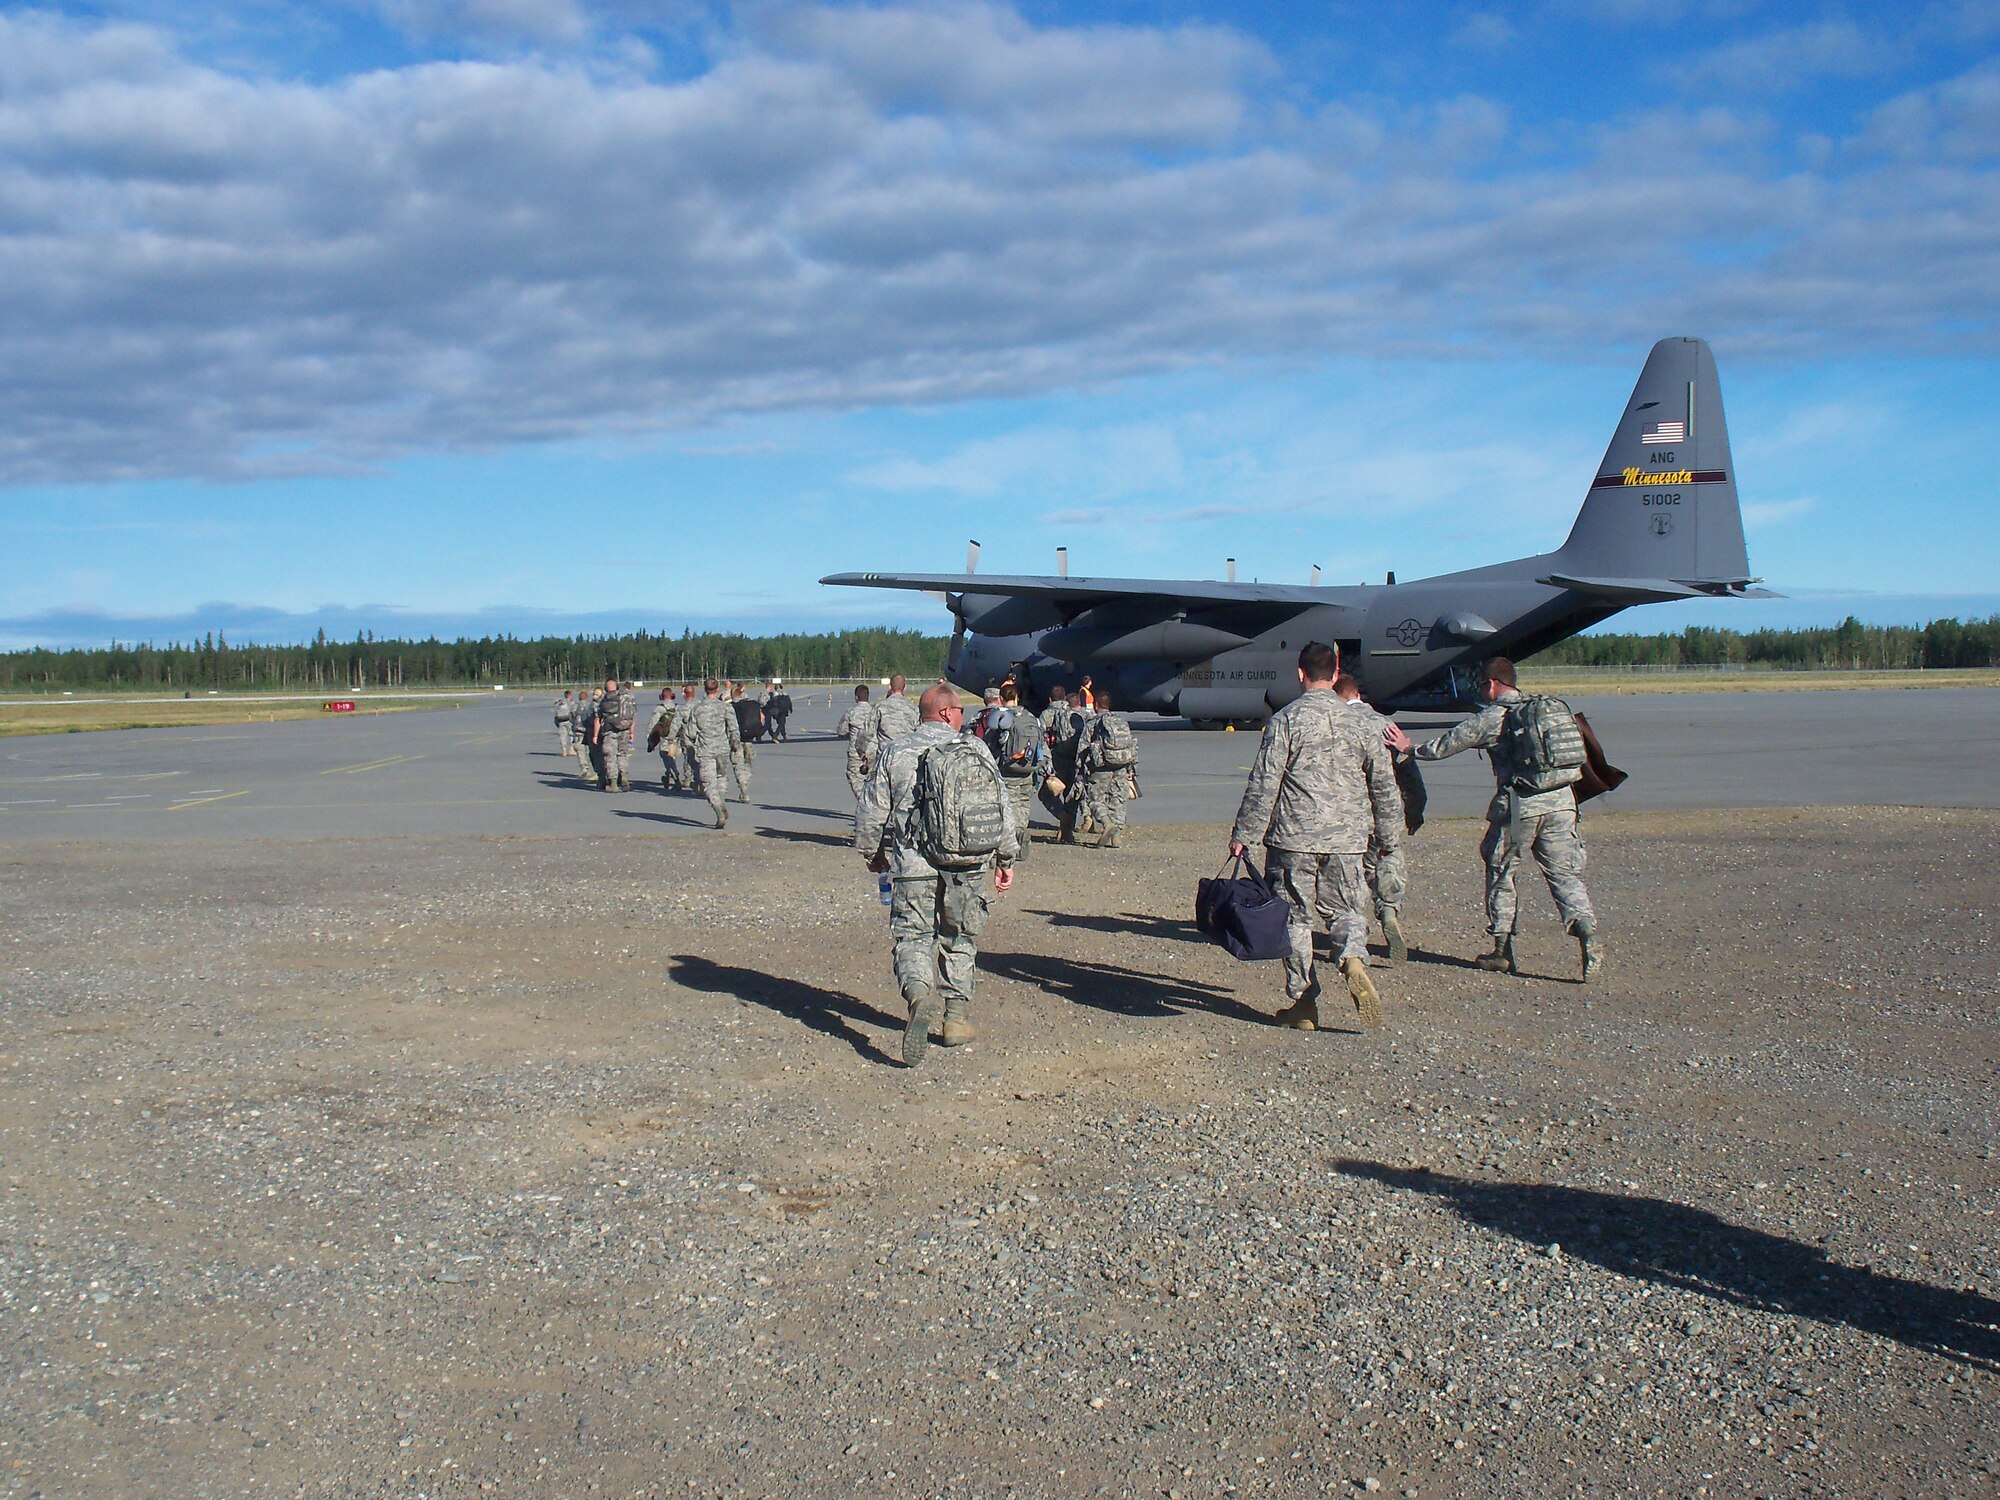 Members of the148th Fighter Wing Civil Engineering and Services Squadrons cross a flightline at Fort Greely, Delta Junction, Alaska July 23, 2011 after spending two weeks constructing training facilities. The civil engineers built a simulated village and a live-fire facility--an effort that required more than 3,000 hours of labor.